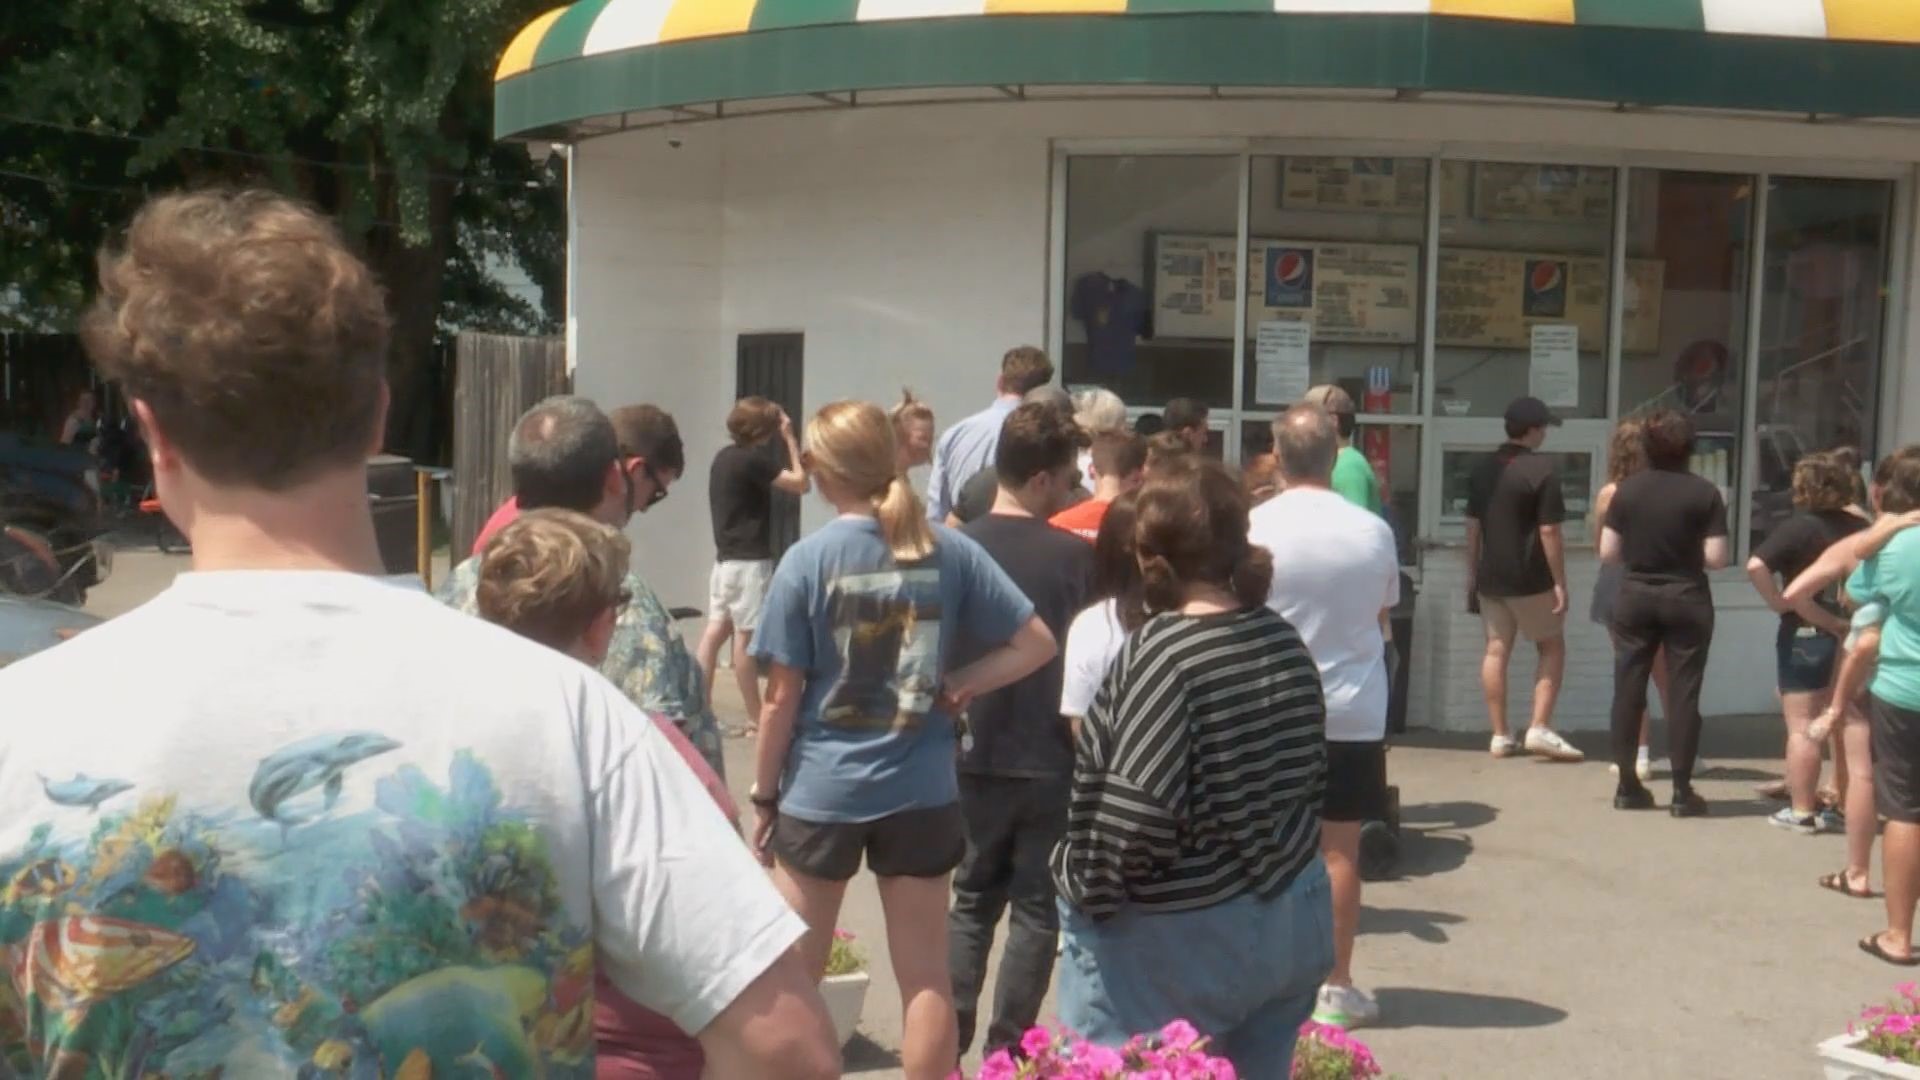 Dairy Kastle has been a hometown staple since 1976.